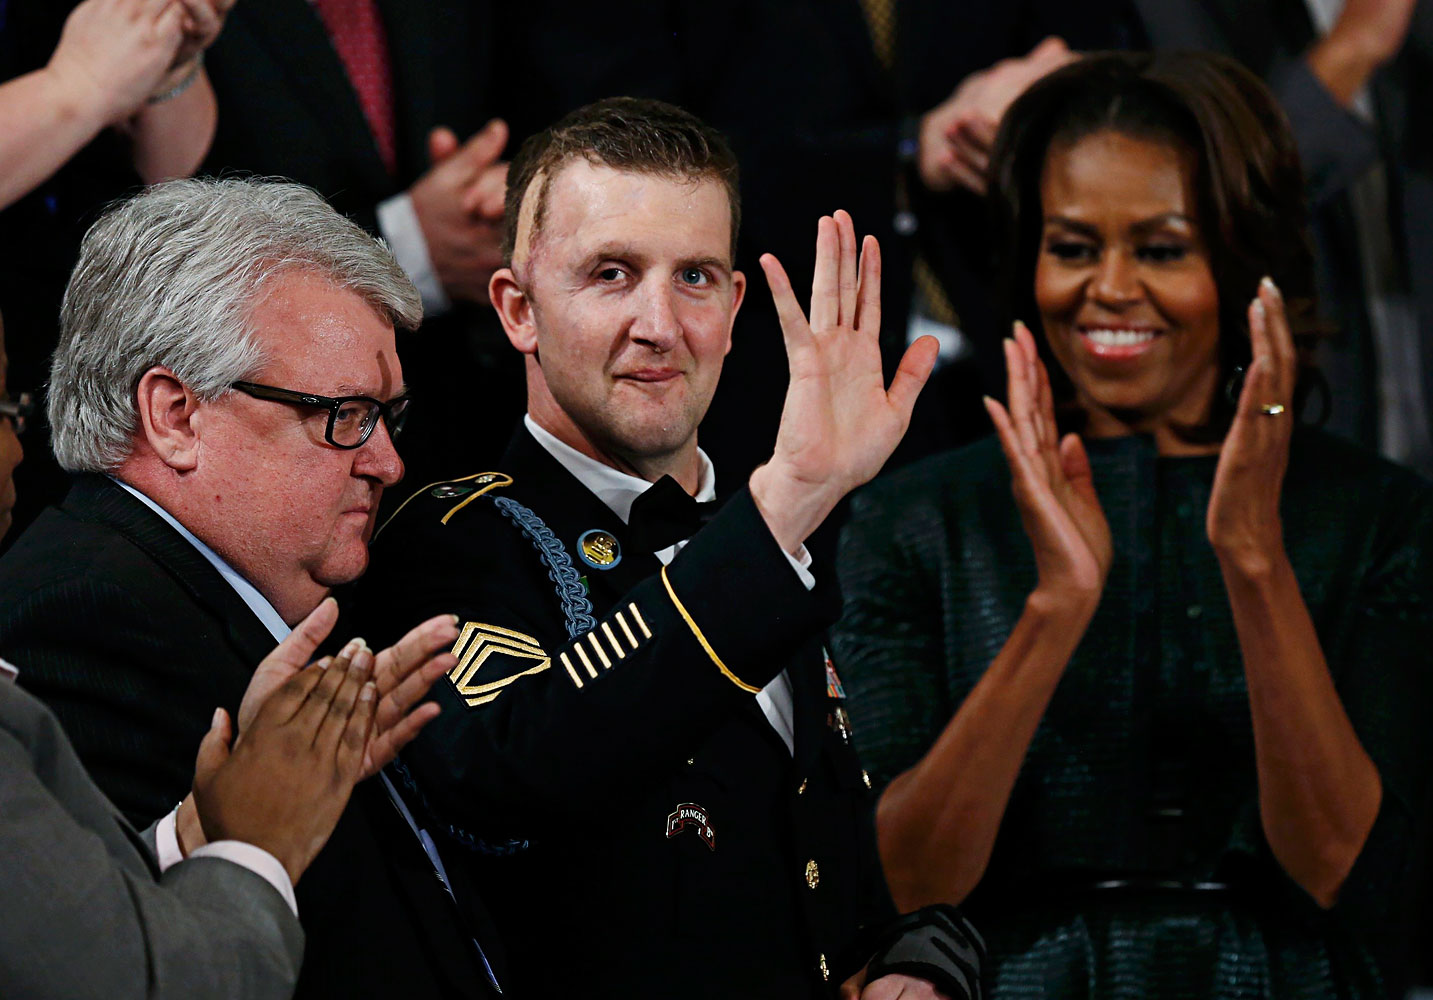 U.S. Army Ranger Remsburg during State of the Union speech